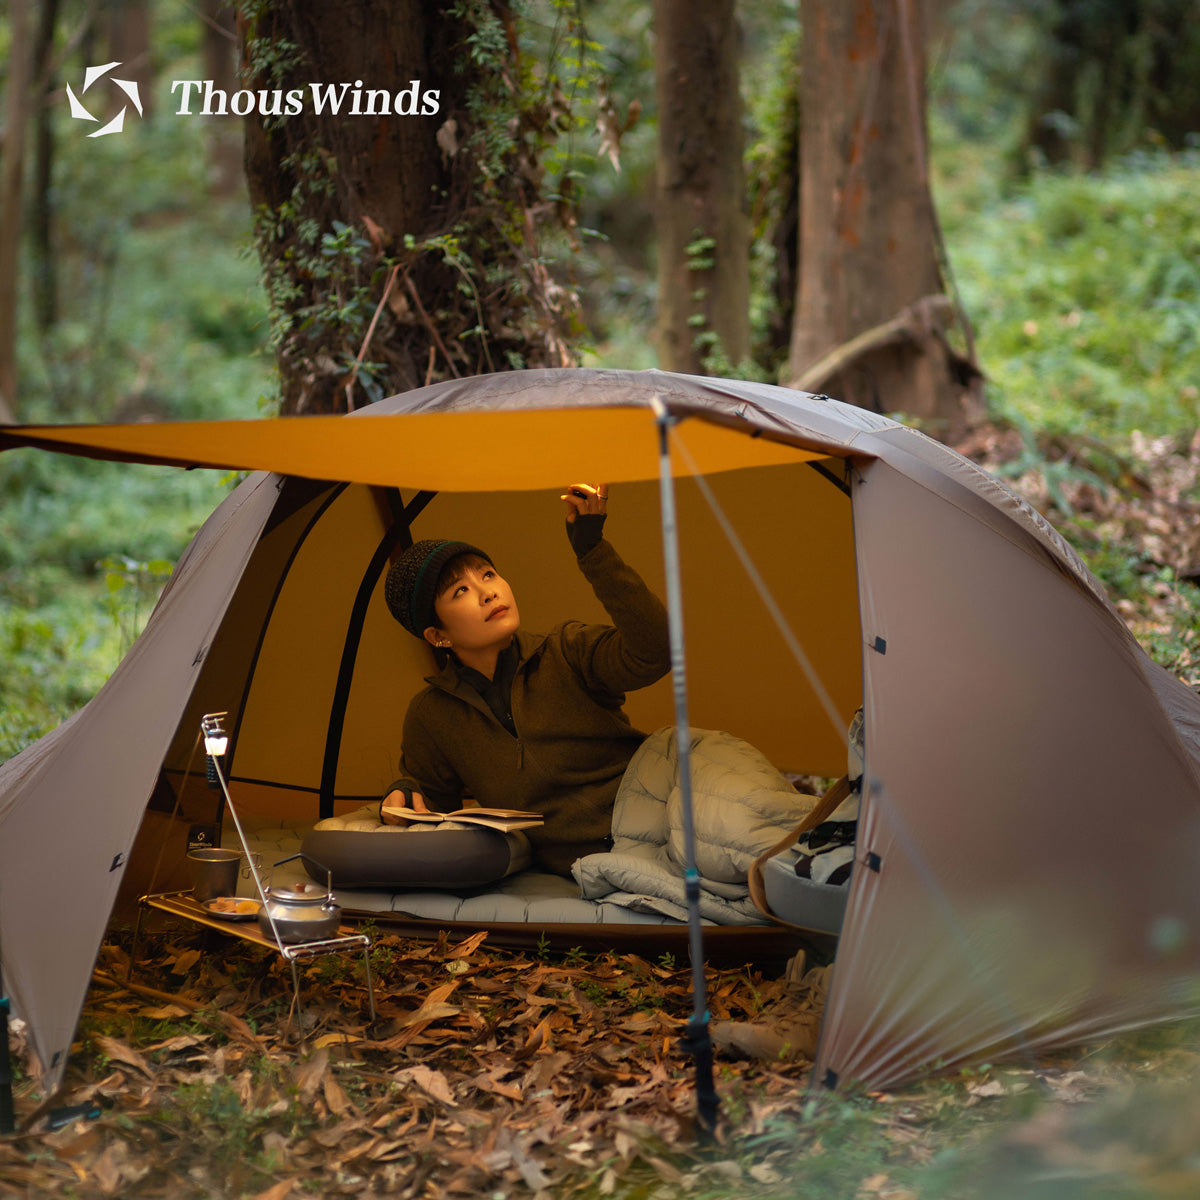 Thous Winds Scorpio Outer Tent - Brown